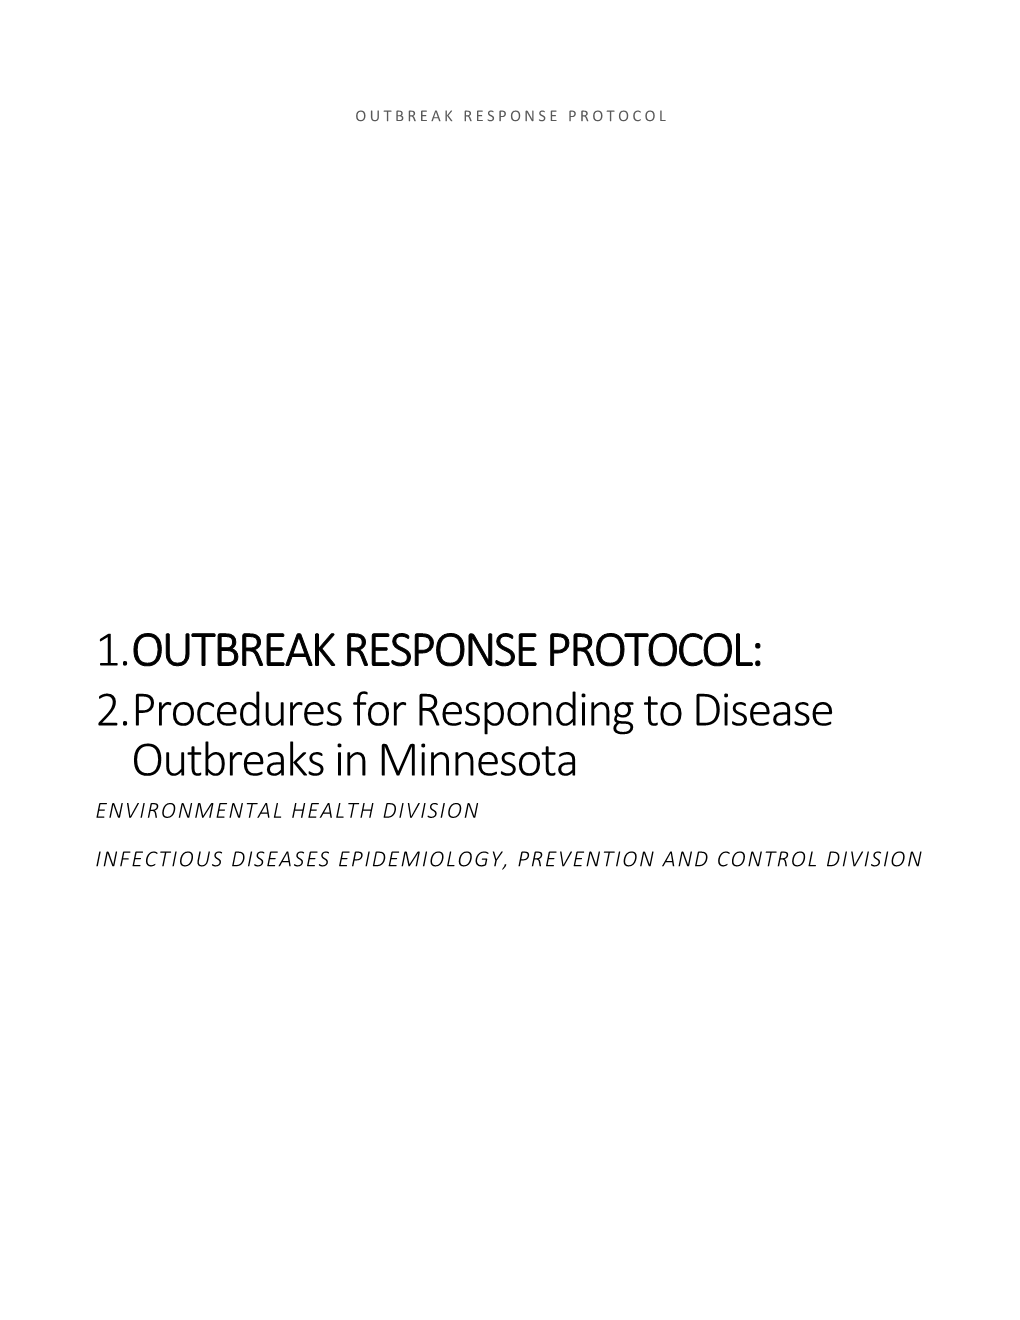 Outbreak Response Protocol: Procedures for Responding to Disease Outbreaks in Minnesota